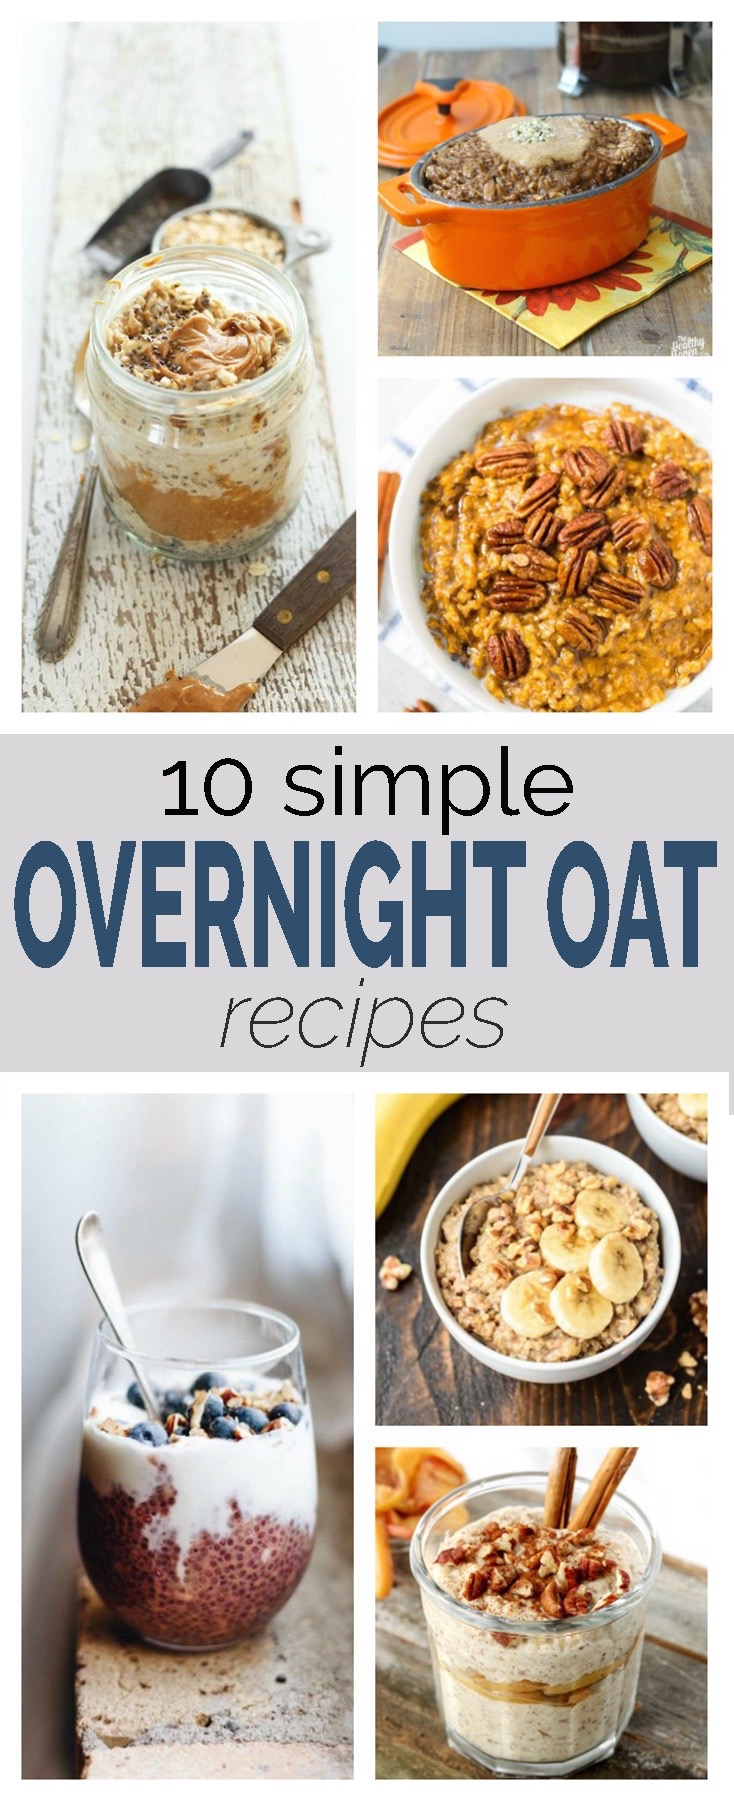 A roundup up 10 Simple Overnight Oat Recipes.